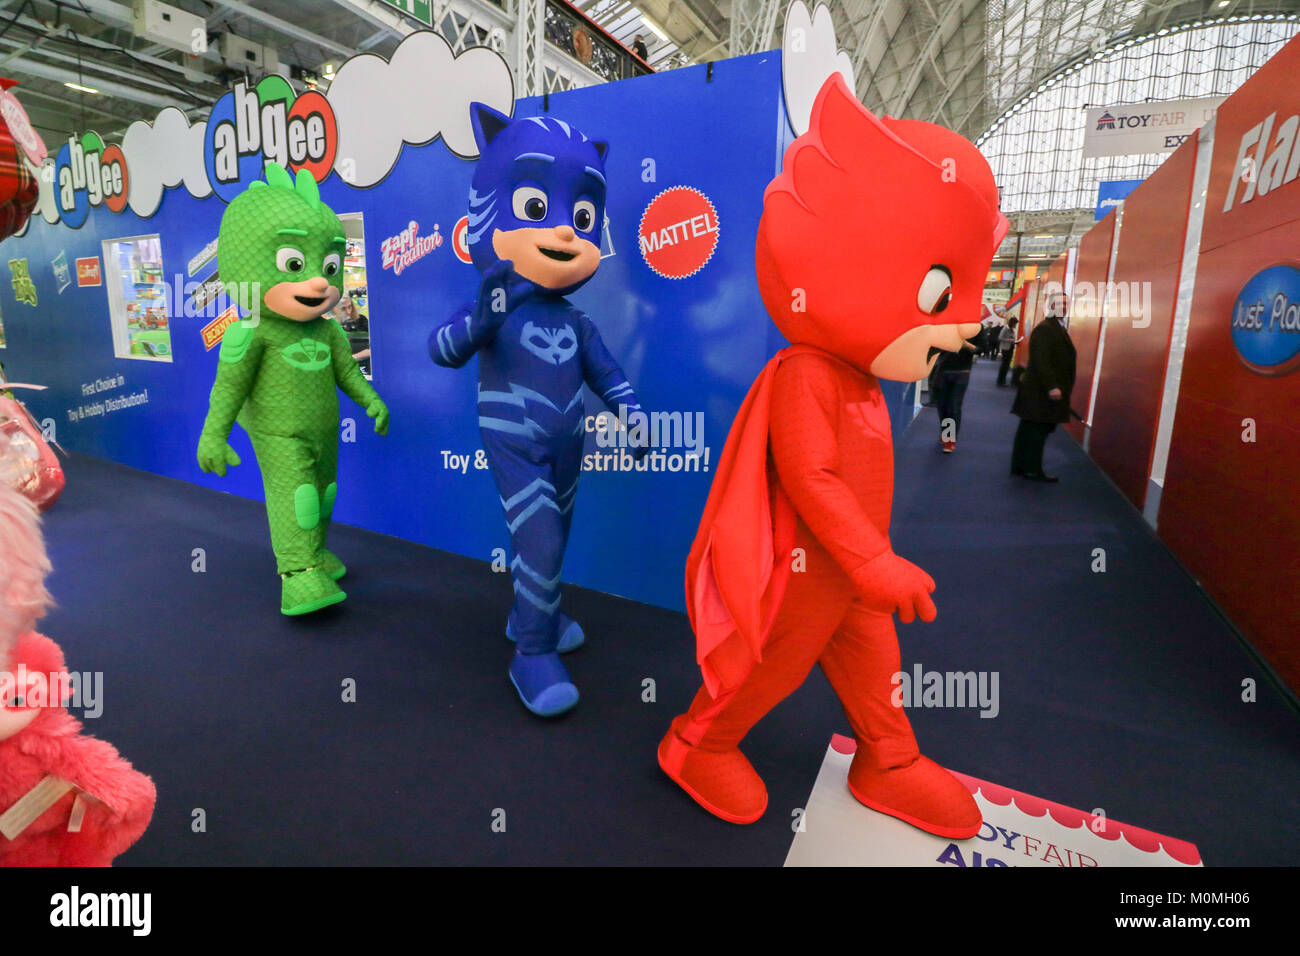 London, UK. 23rd Jan, 2018. The 65th annual toy fair organized by the British Toy and Hobby Associaiton opens at London Olympia showcasing more than 260 brands and products from UK and International toy manufacturers Credit: amer ghazzal/Alamy Live News Stock Photo